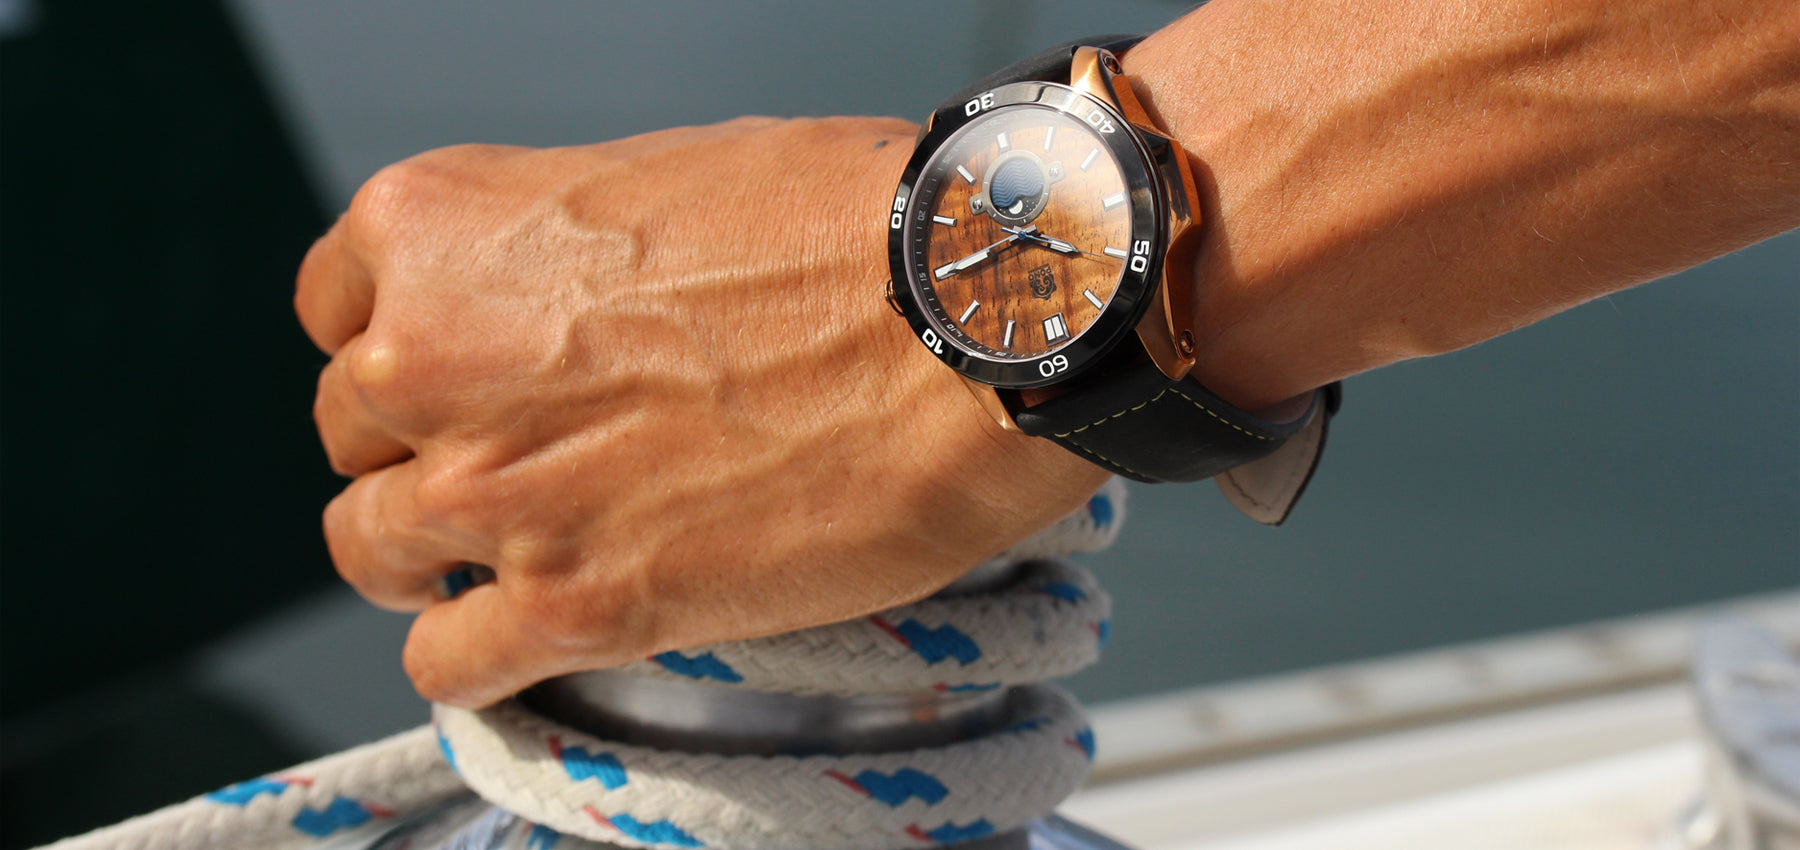 waterproof wood watch with stainless body closeup on mans wrist as he works the winch and lines of a sailboat